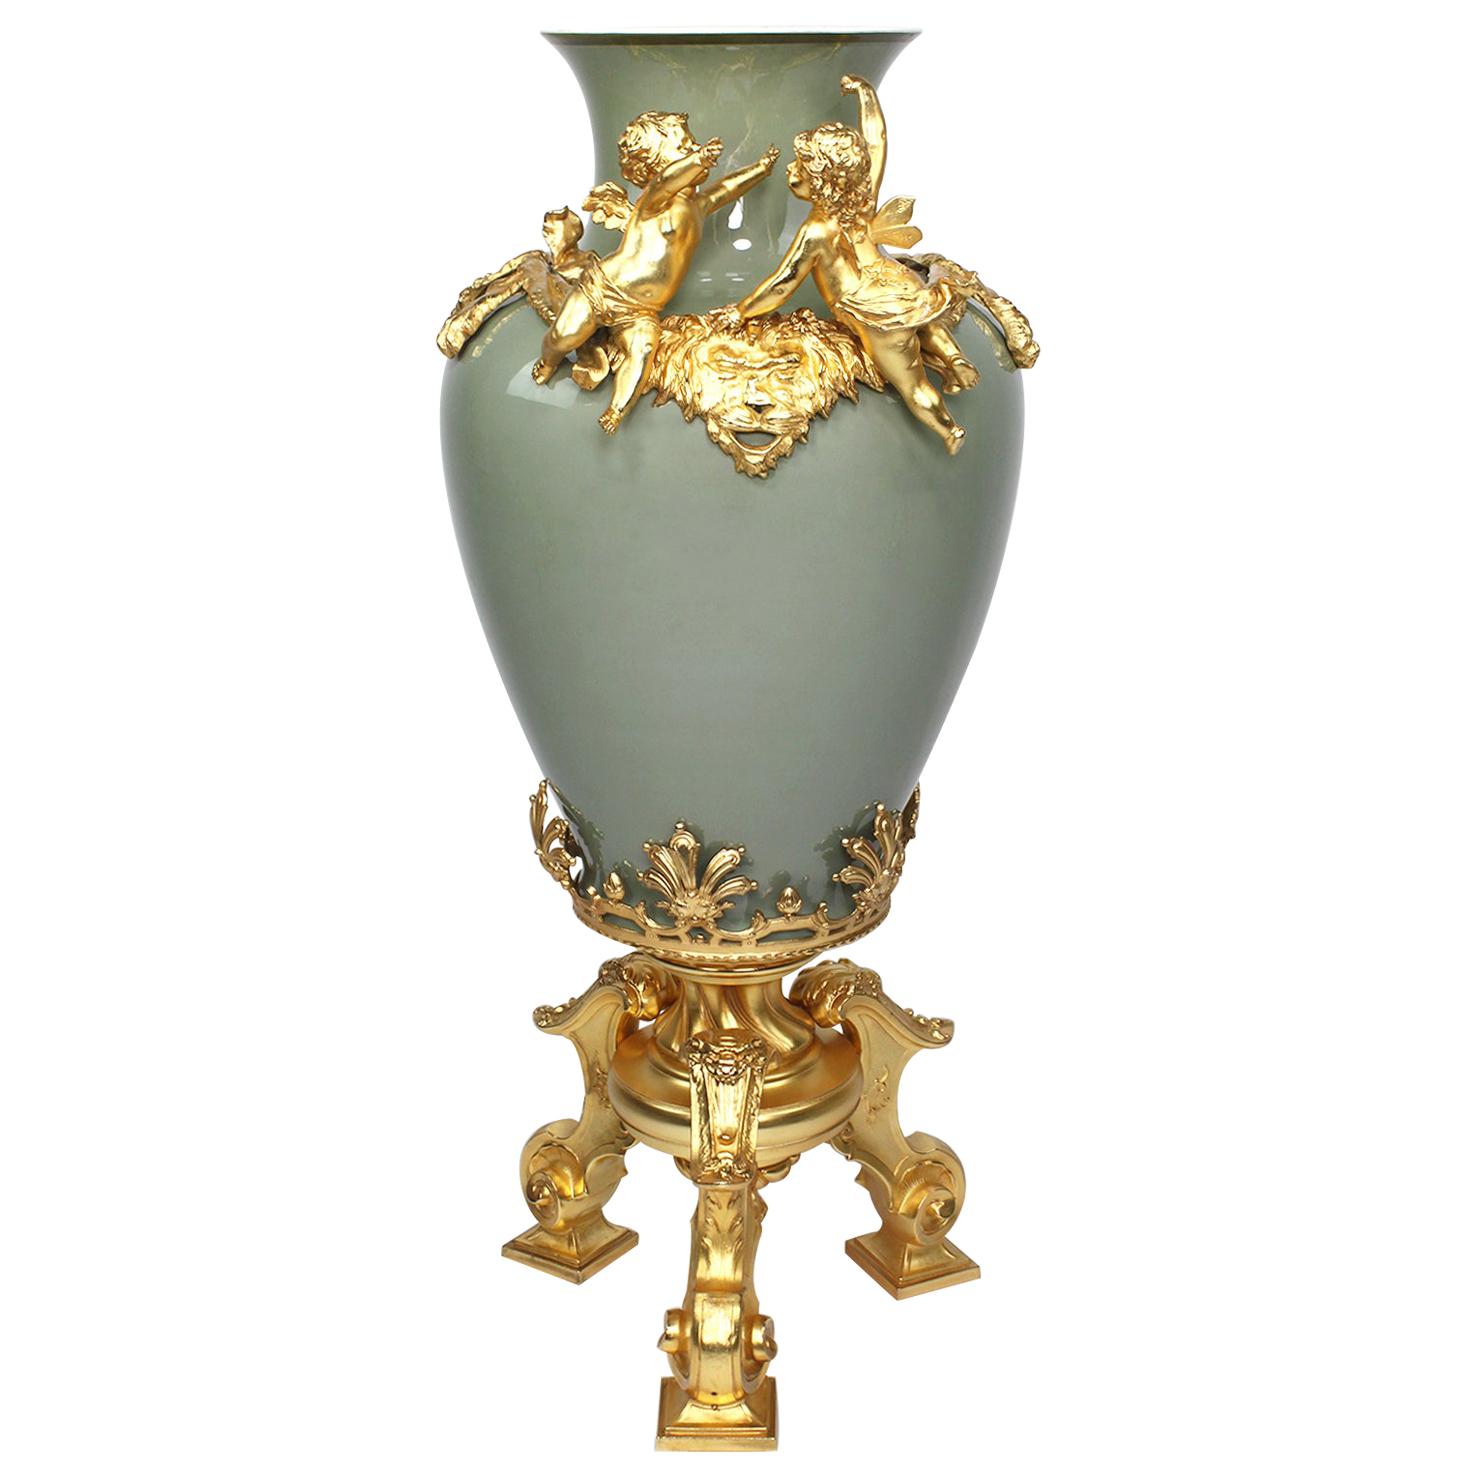 Continental 19th-20th Century Porcelain and Gilt Metal Mounted Vase with Cherubs